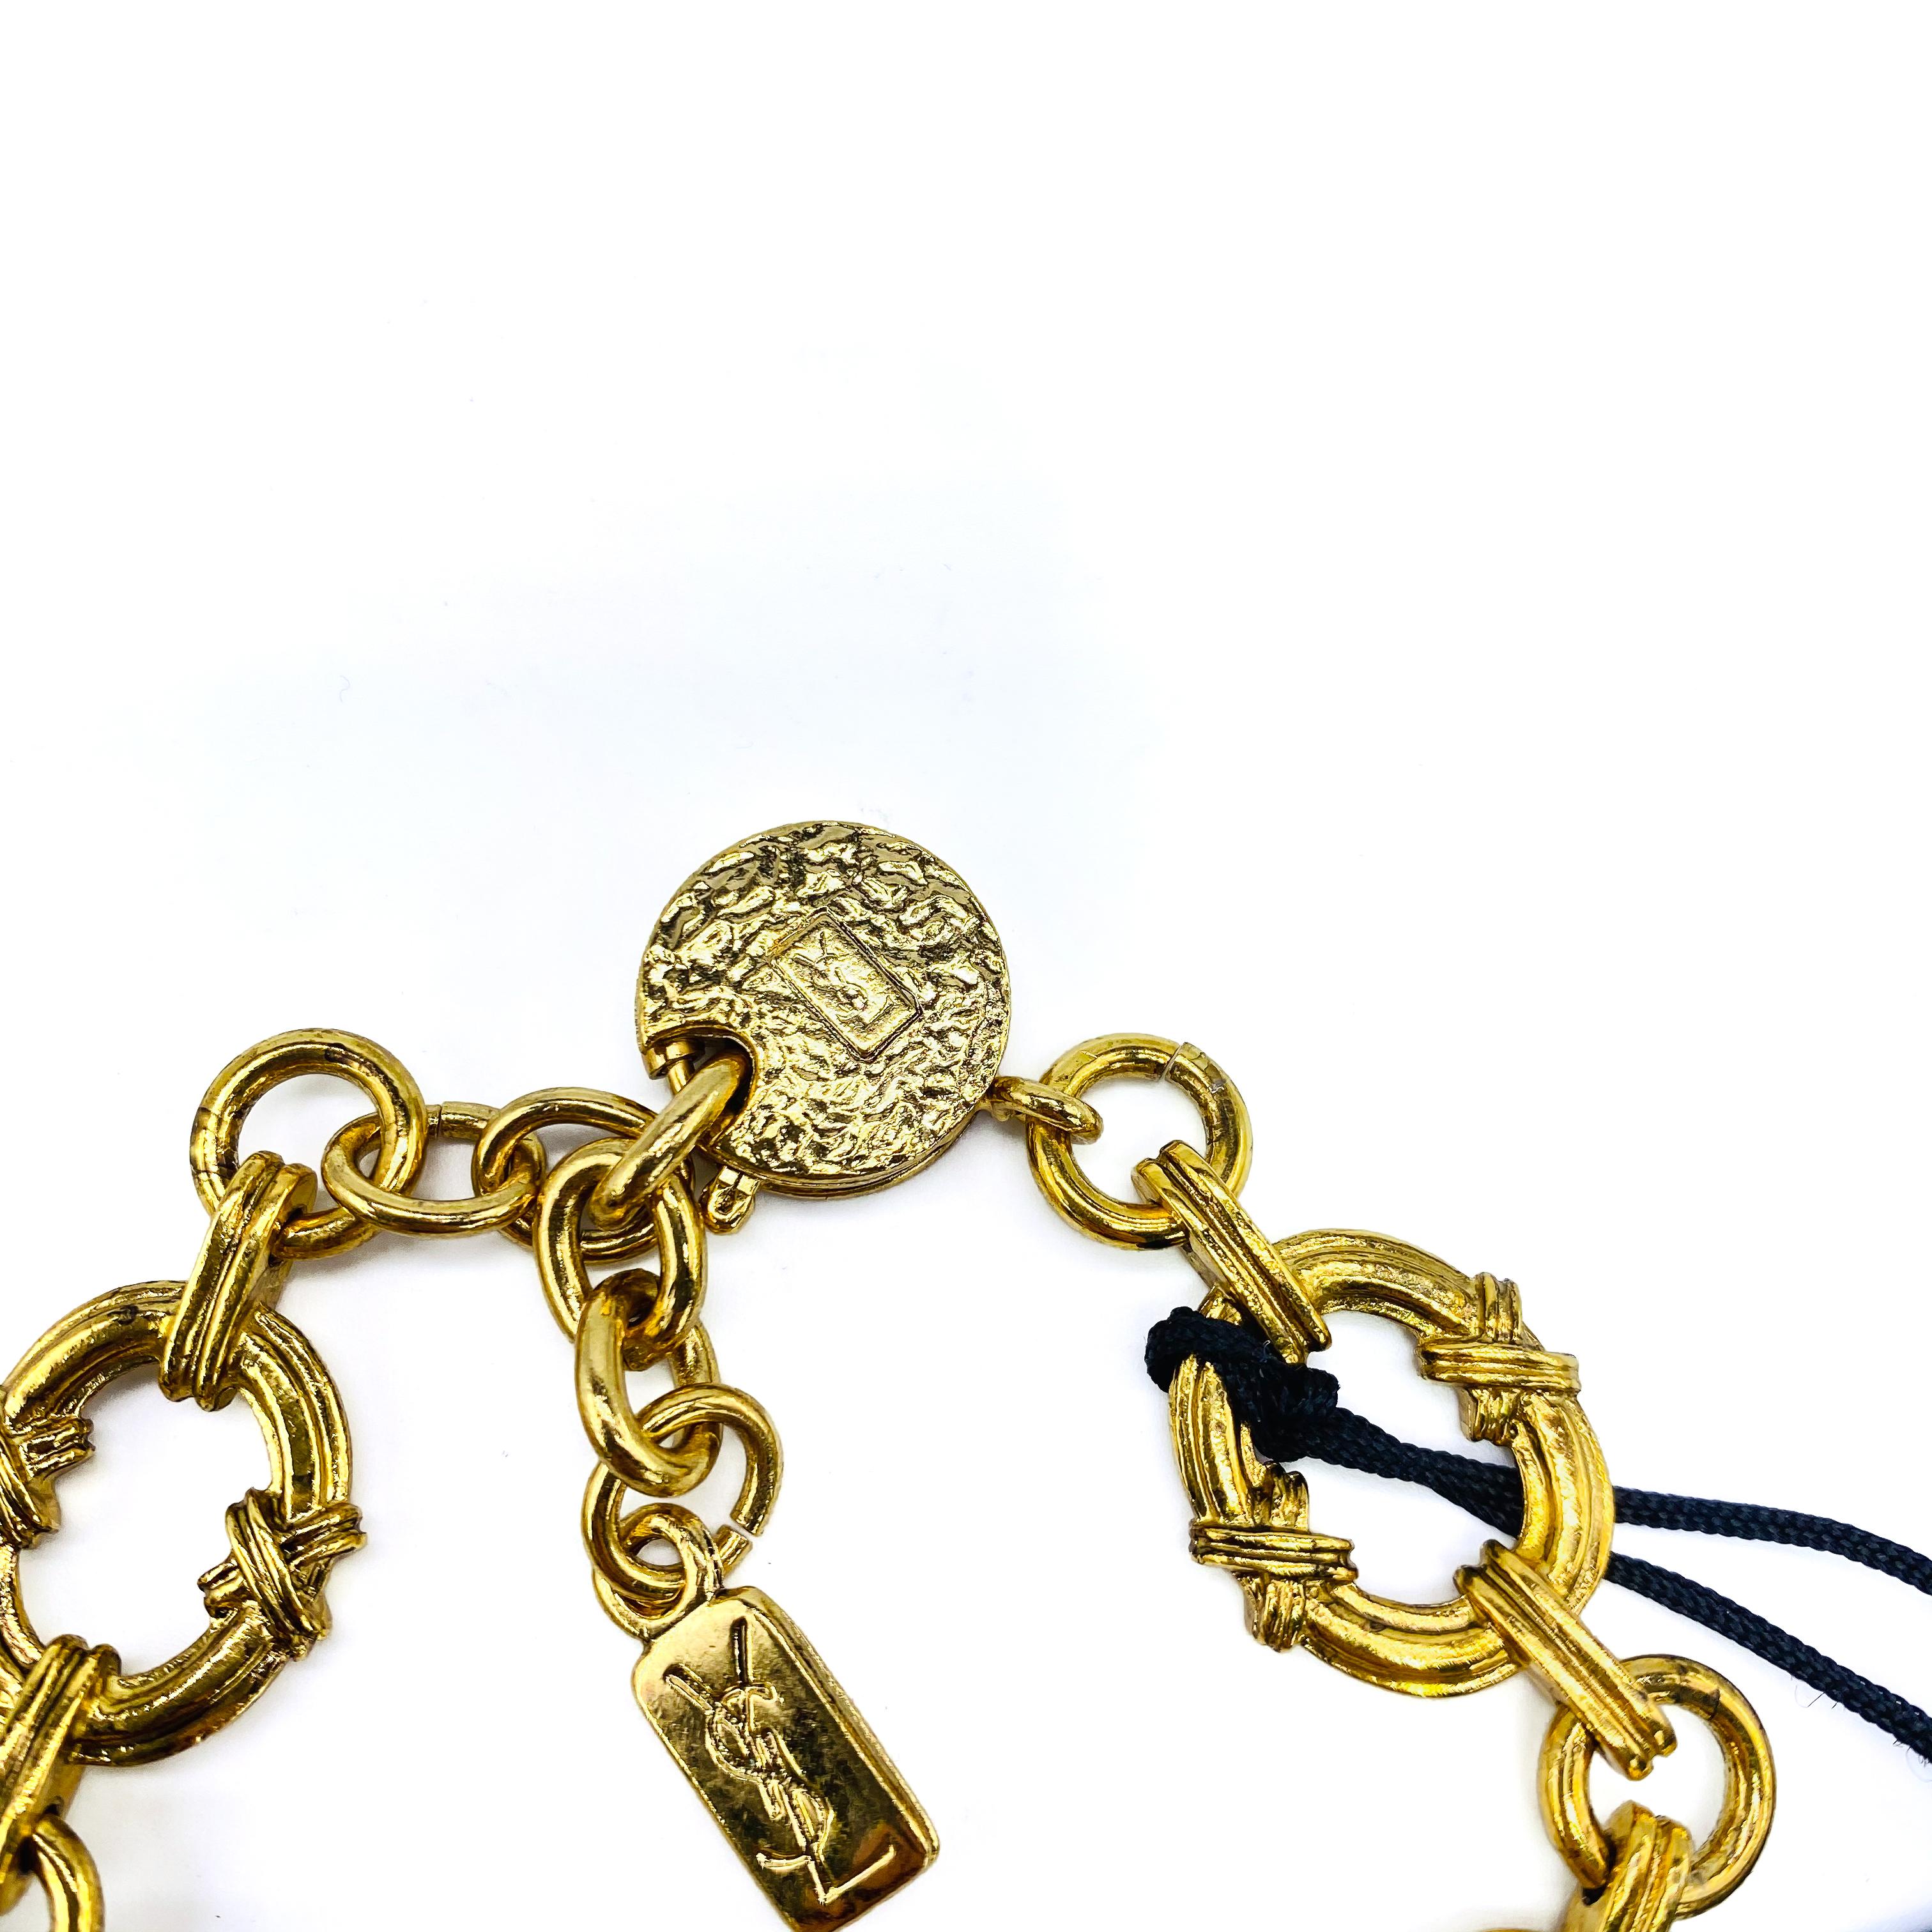 YSL Vintage 1980s Bracelet

Timelessly elegant chain link bracelet from the iconic House of Yves Saint Laurent

Detail
-Made in France in the 1980s
-Crafted from gold plated metal
-Beautifully ornate chunky links
-Comes with original label

Size &